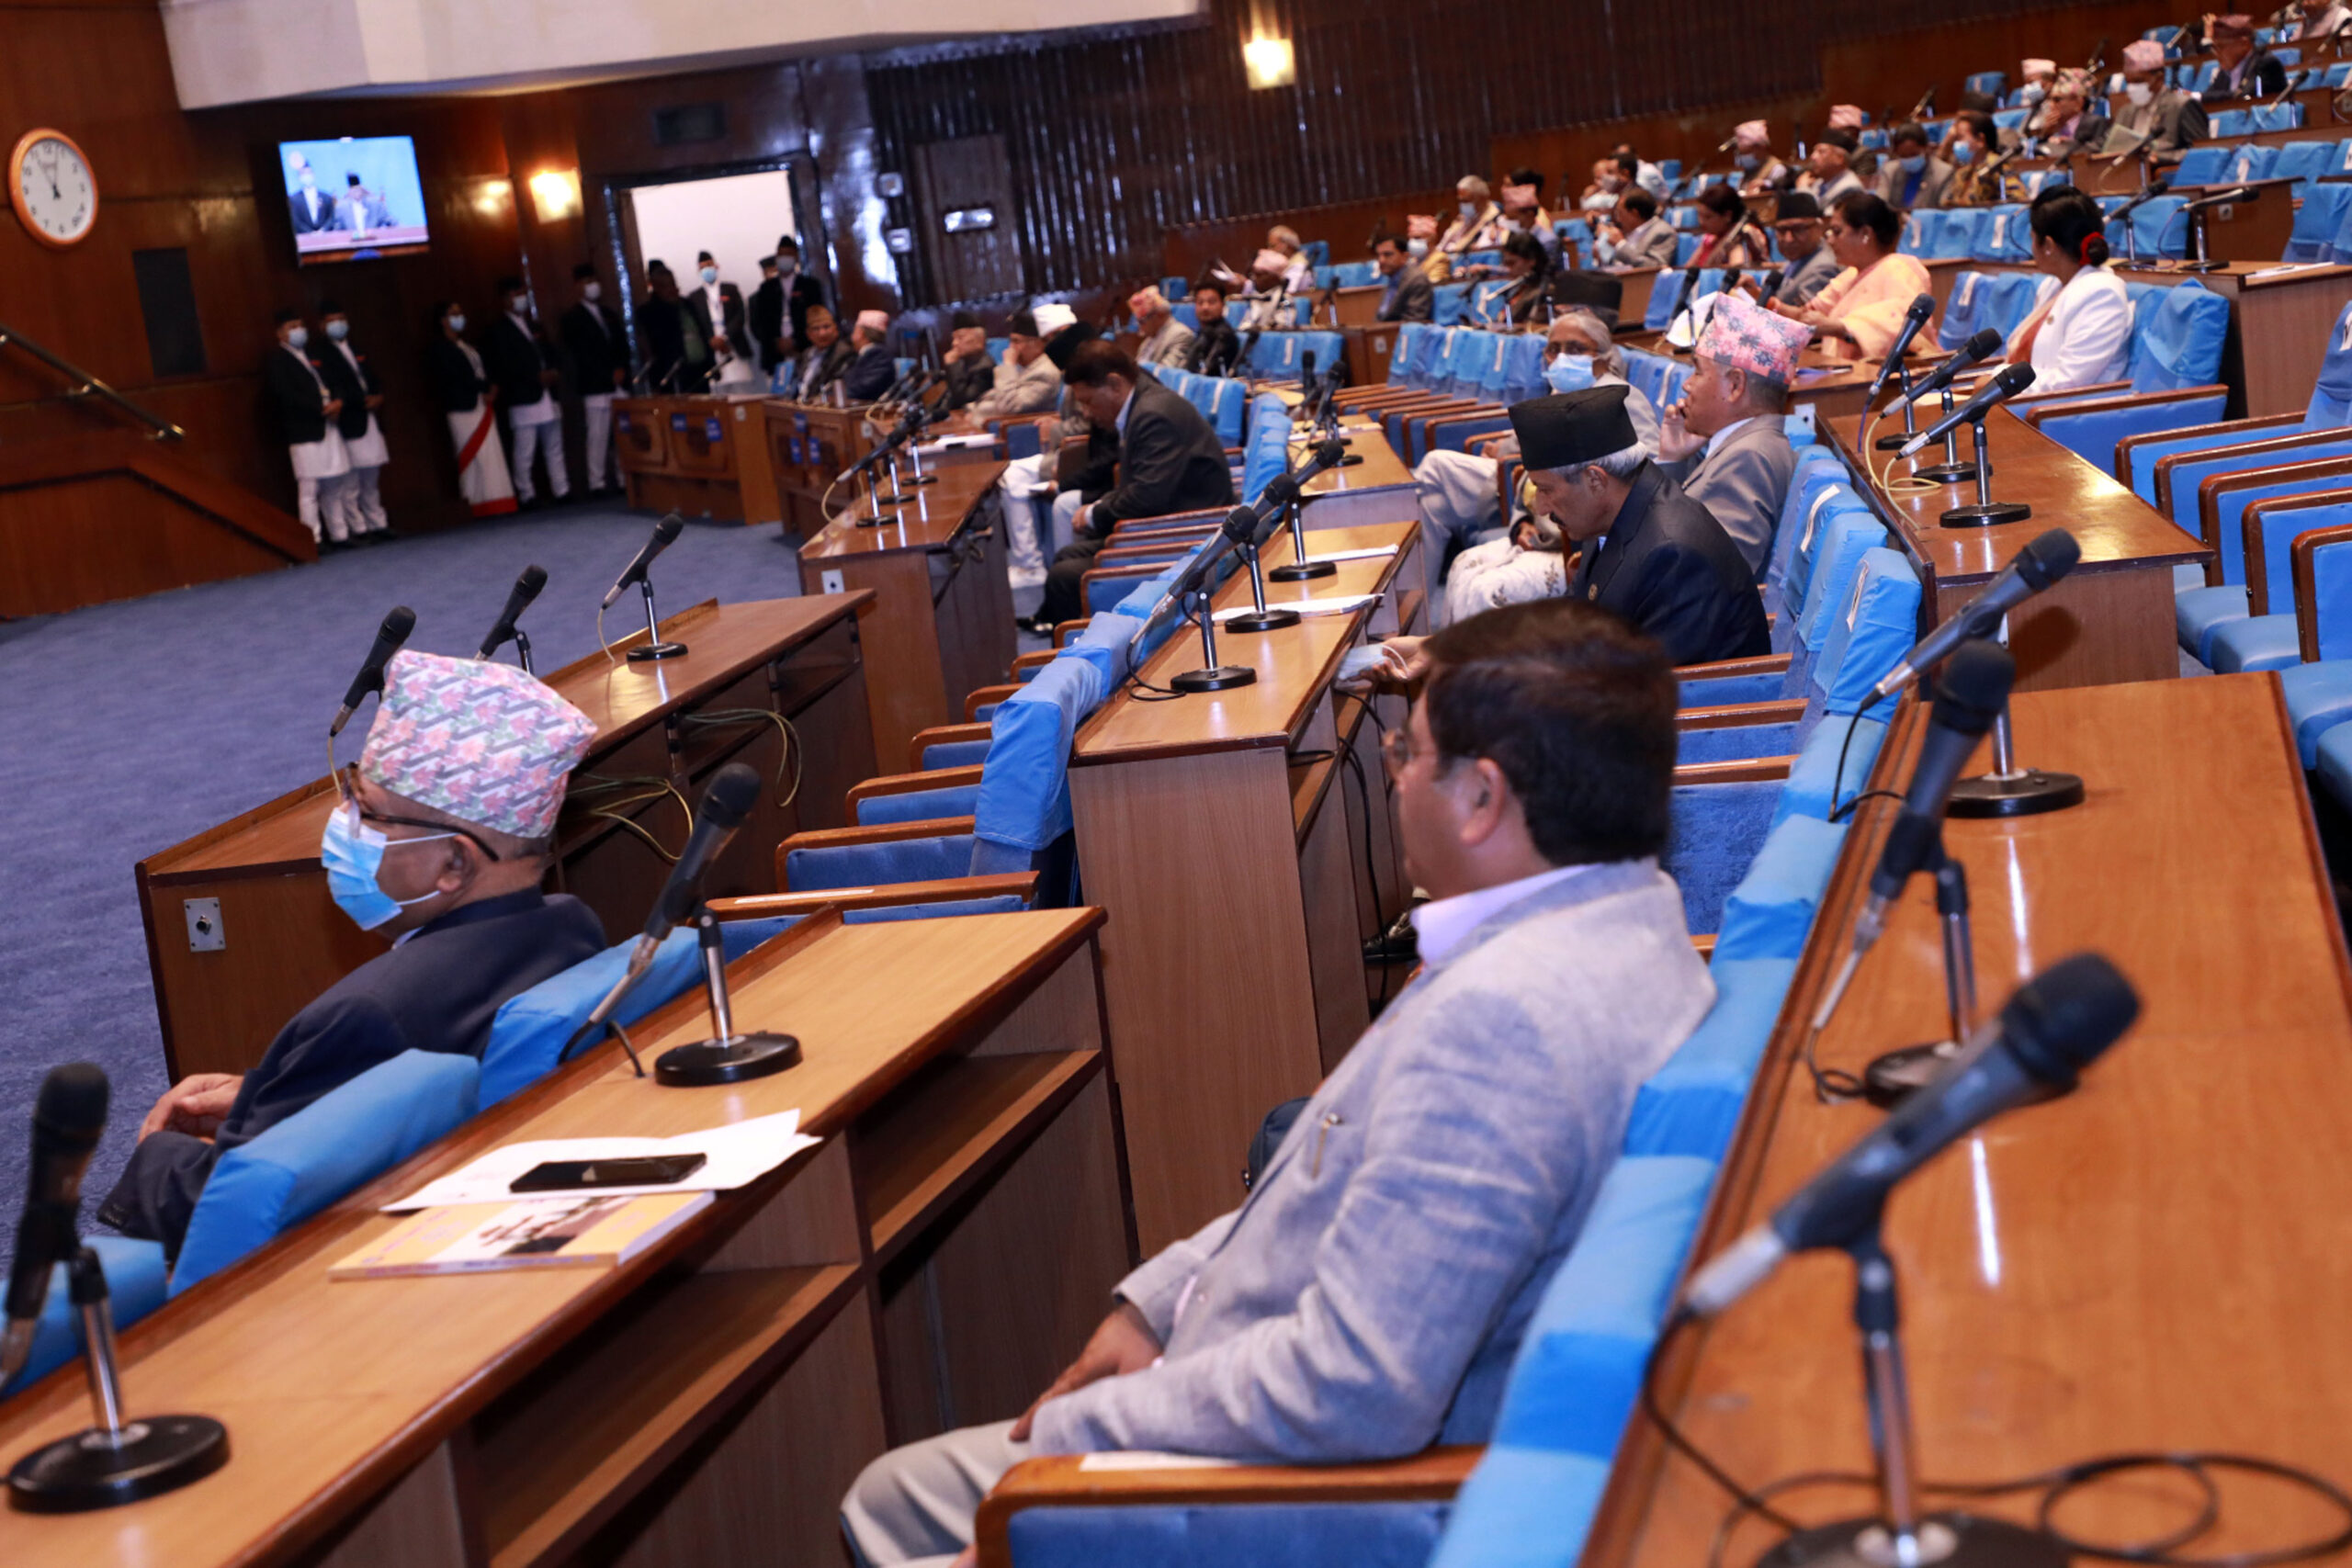 HoR meeting: Parliamentarians focus on making independent economy